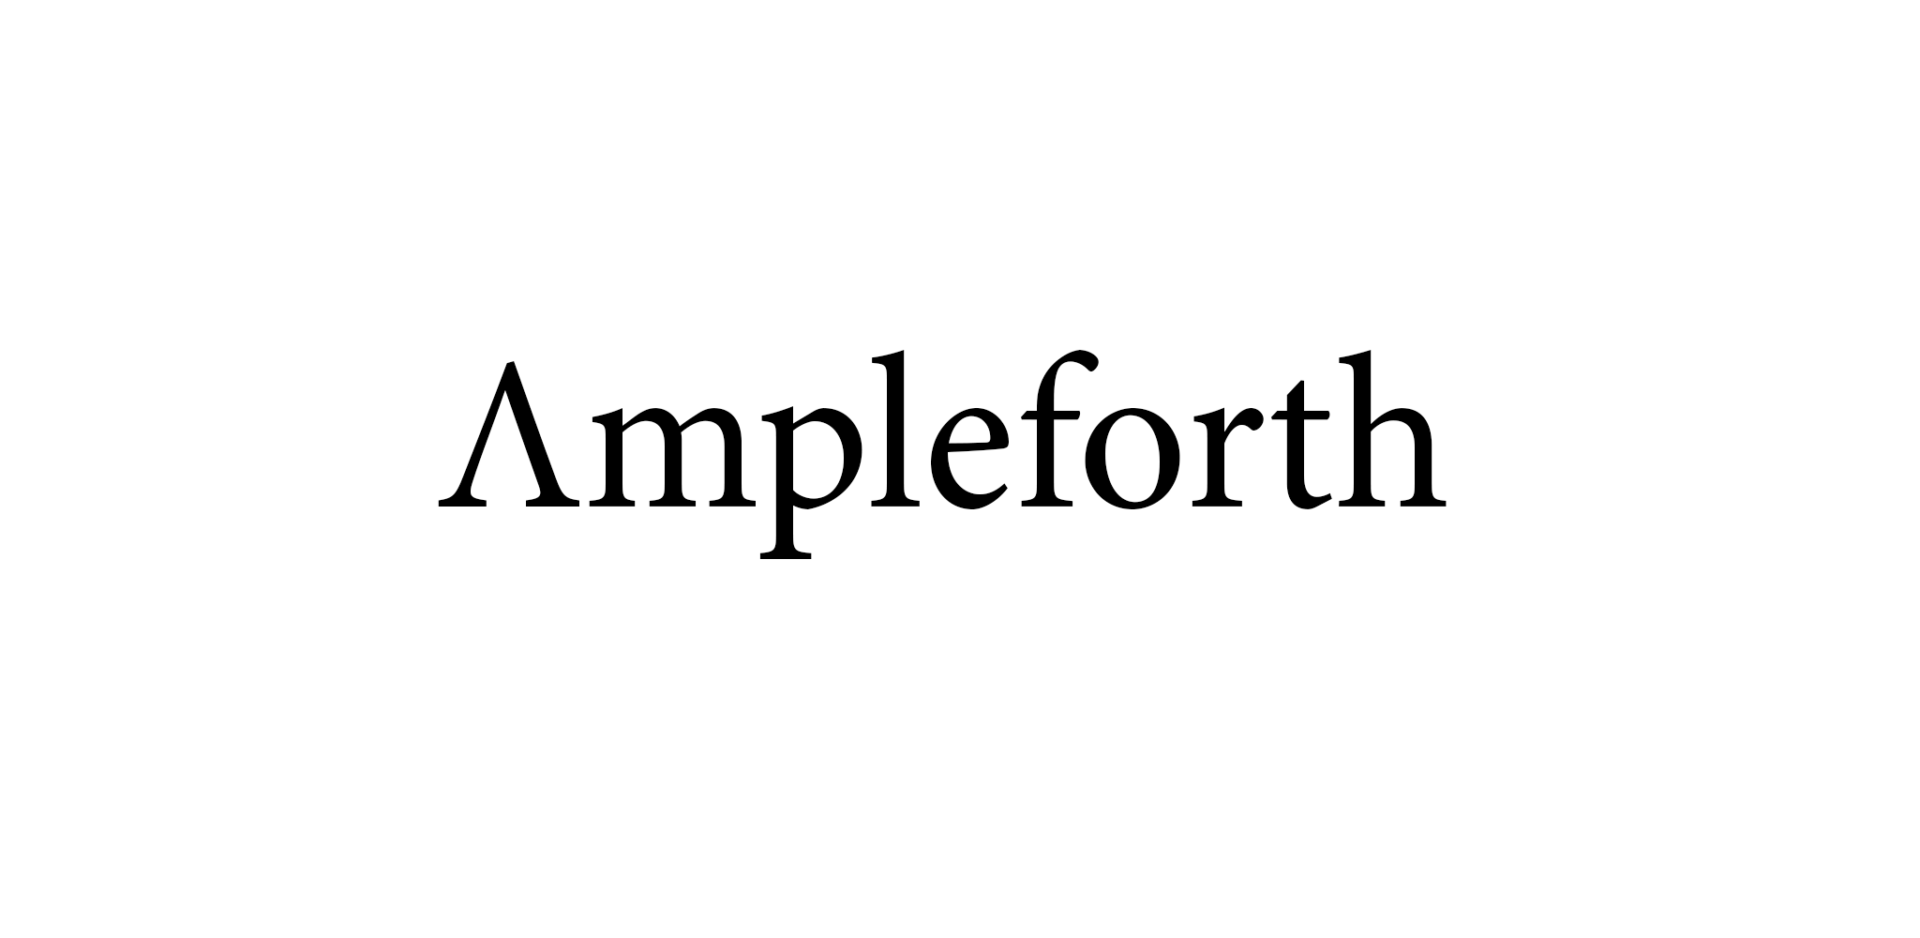 Ampleforth: A Digital Asset Aiming To Differentiate Itself From Bitcoin 10